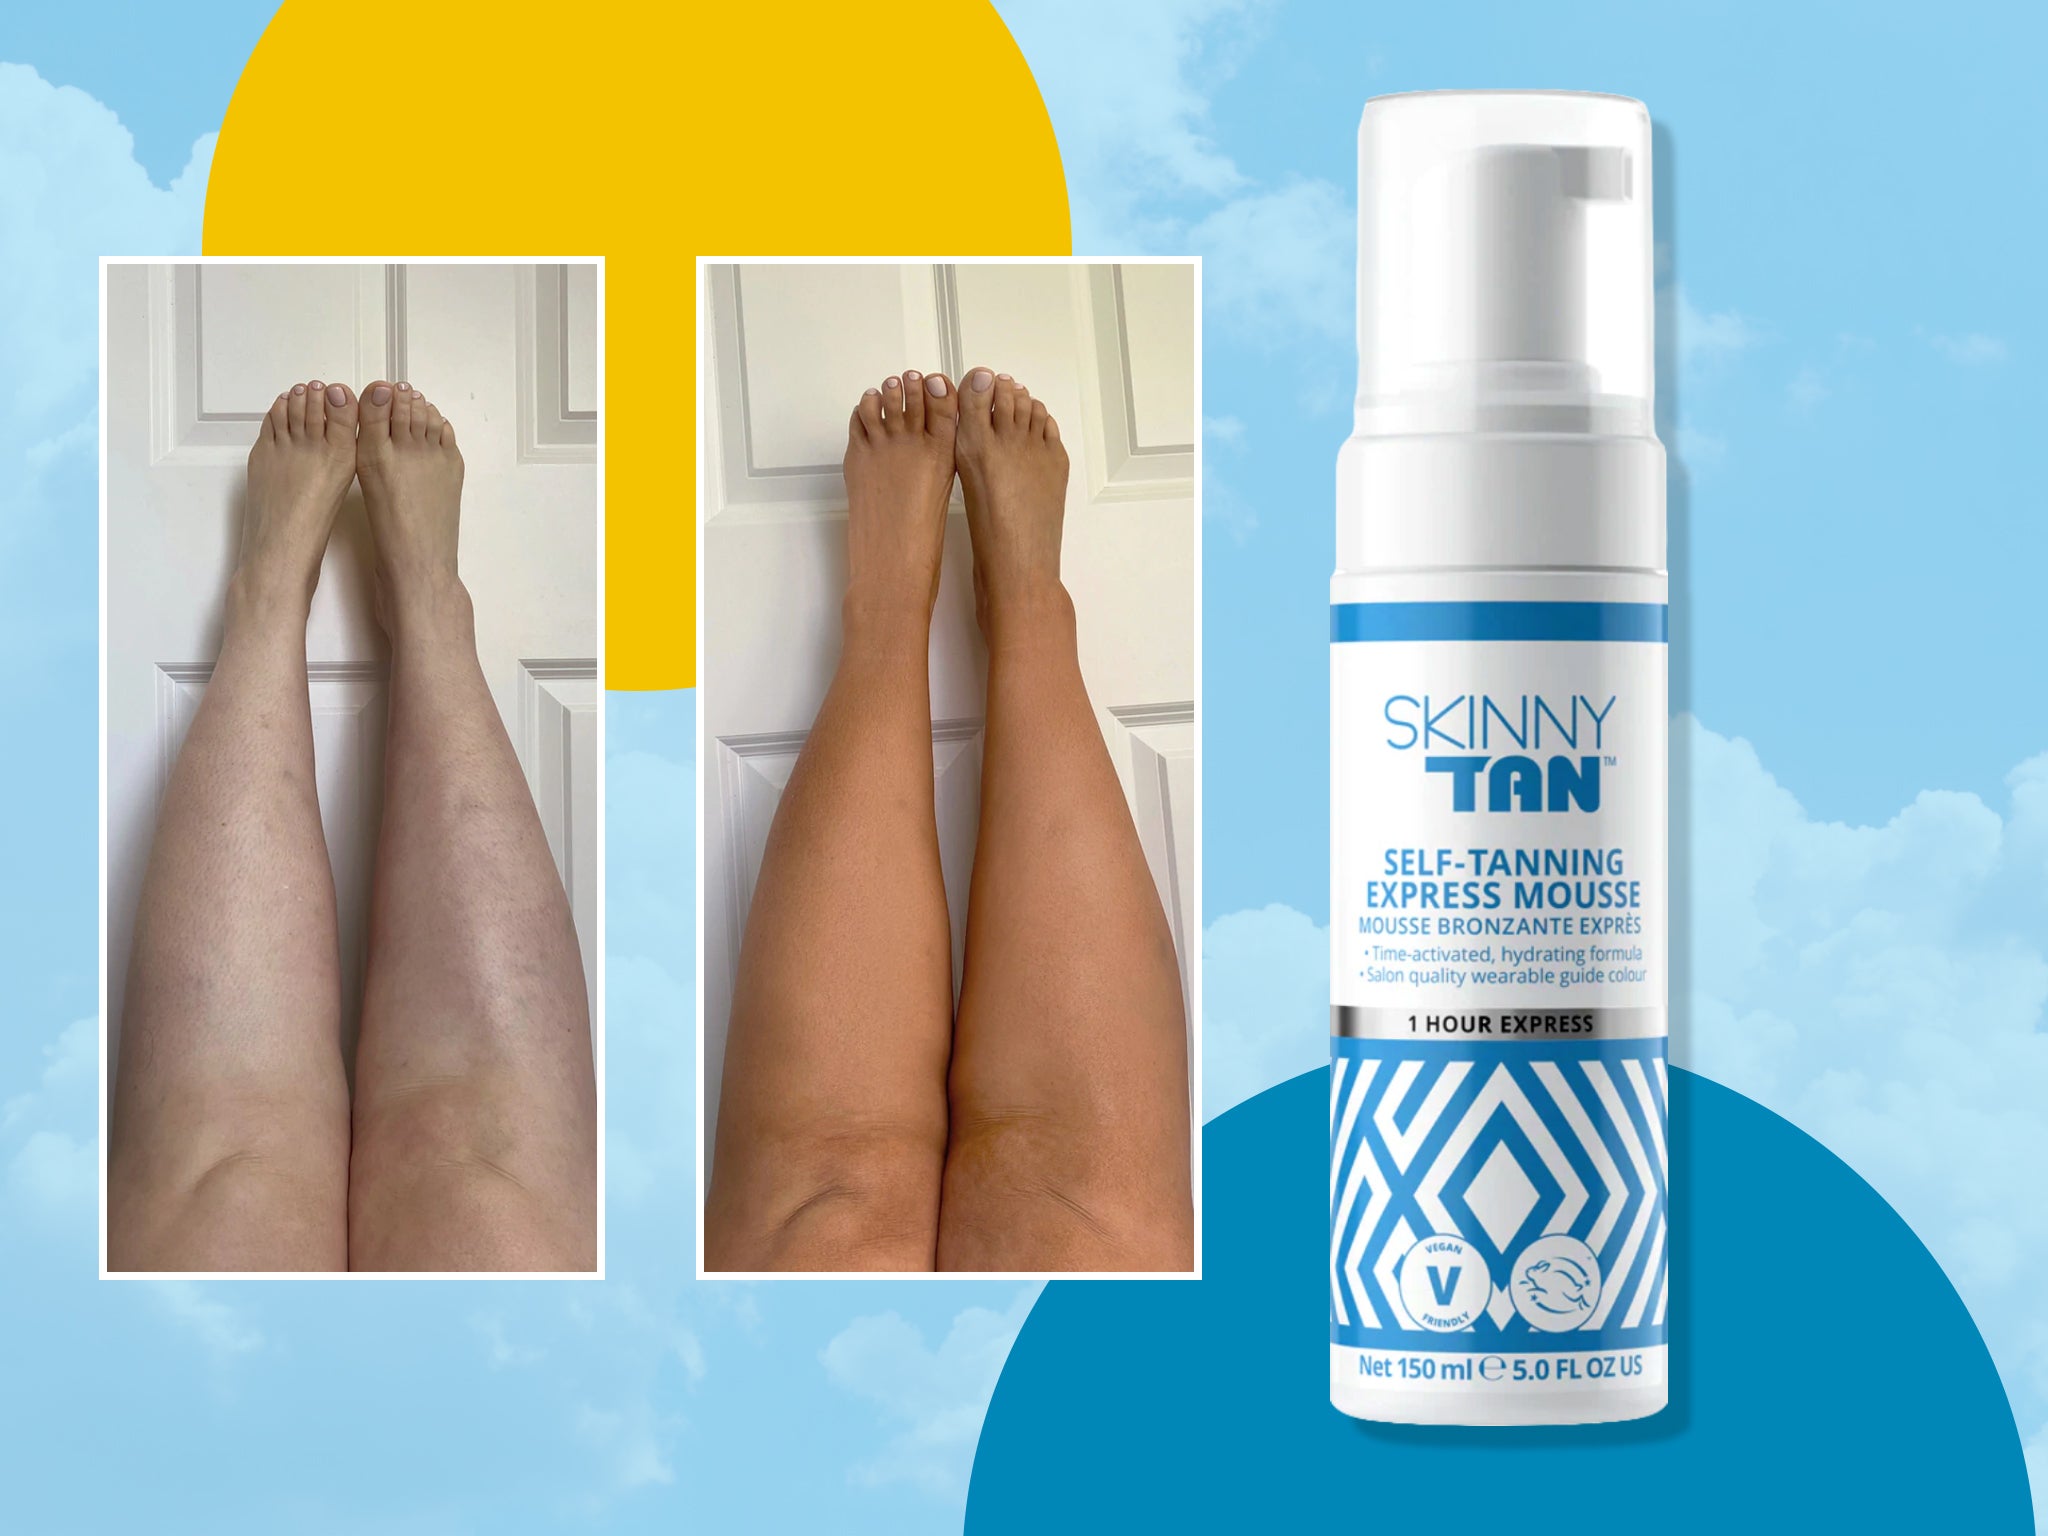 This mousse provides rapid tanning for those last-minute plans